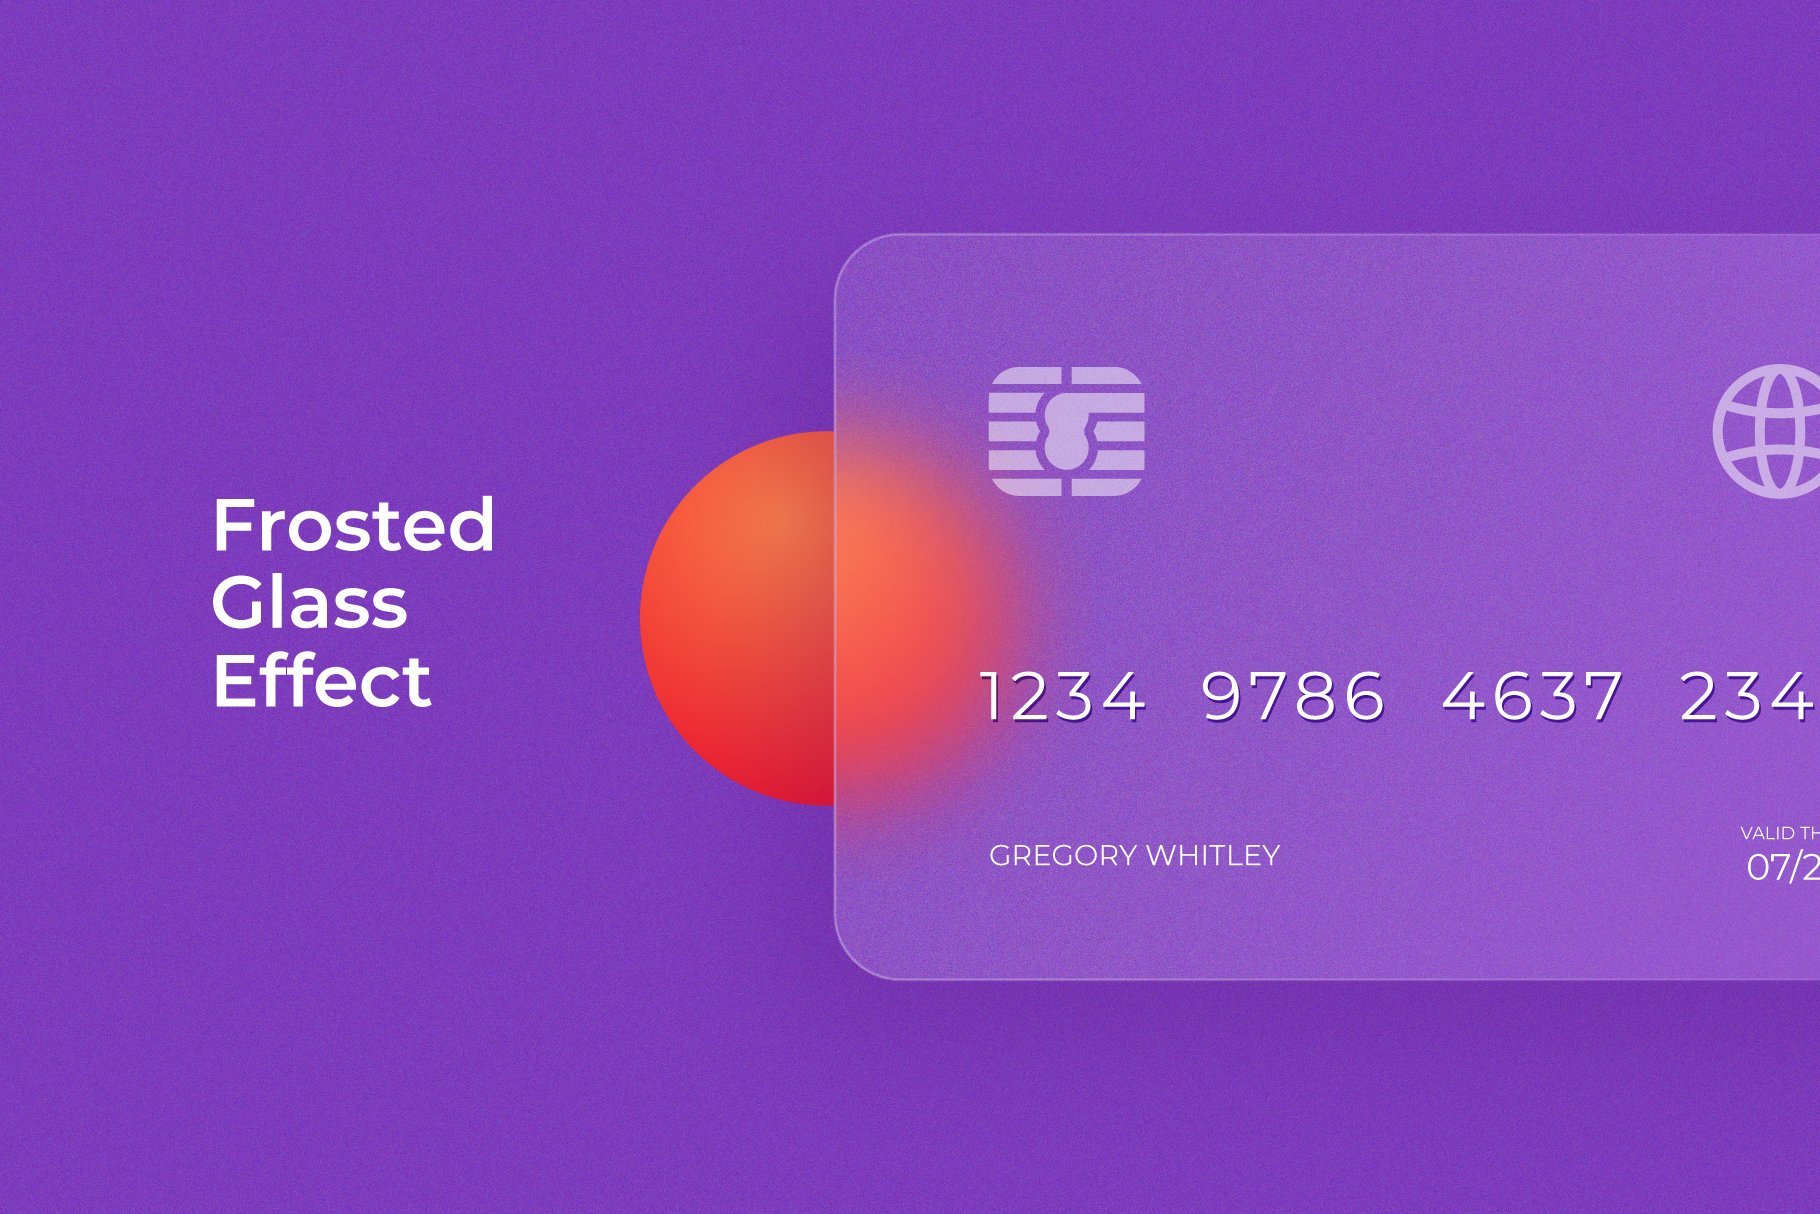 A solid matte purple with a bright round orange accent created the perfect canvas for advertising.